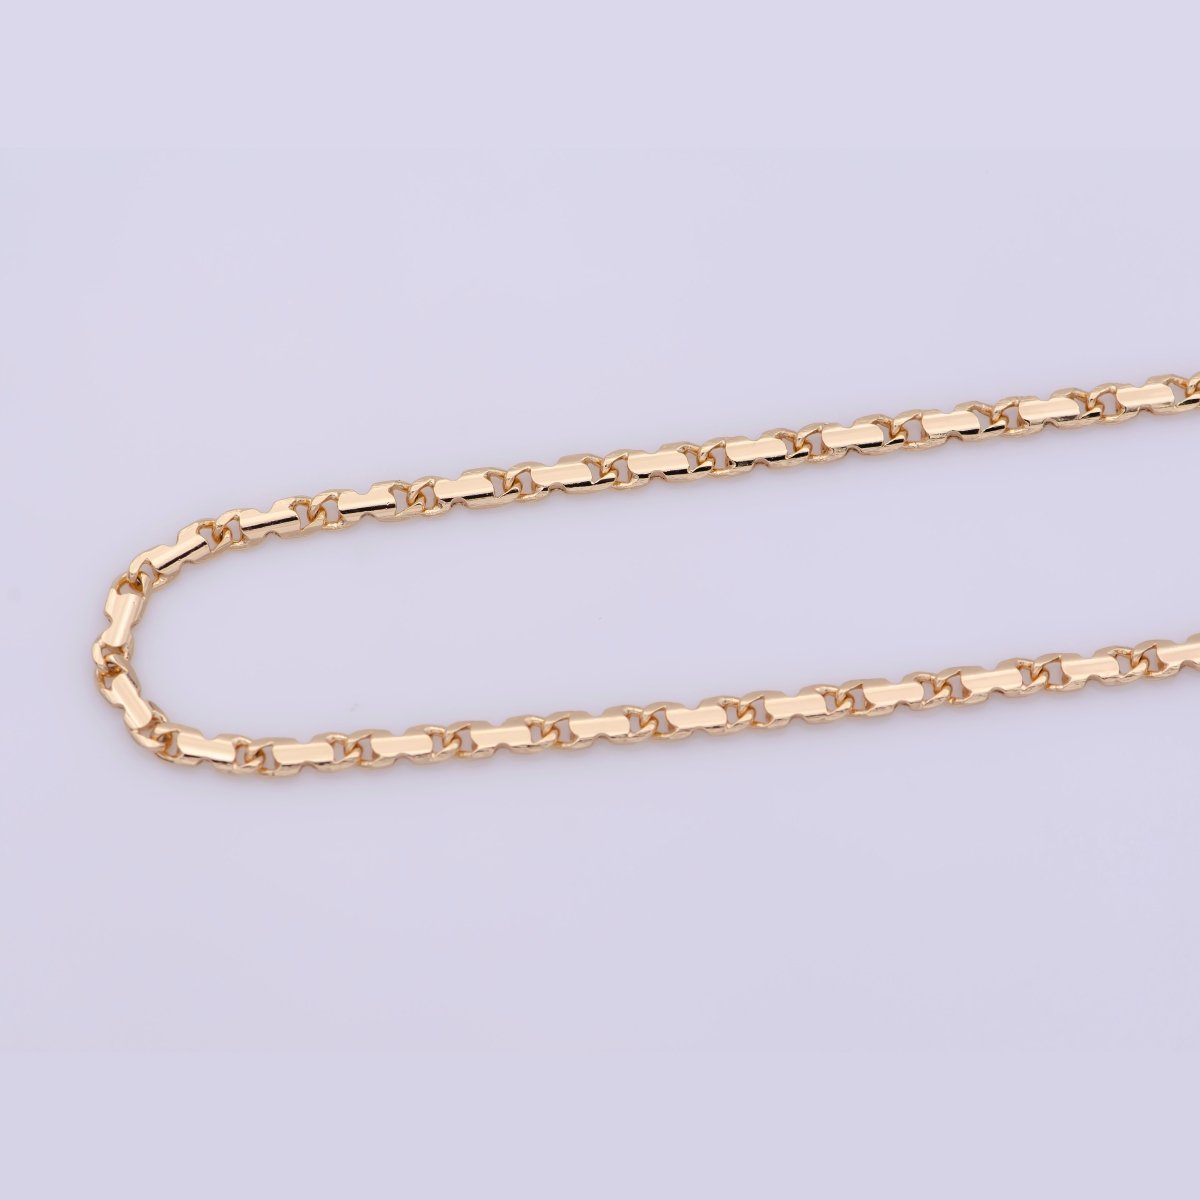 18K Gold Filled Scroll Chain Necklace, 18 Inch Scroll Finished Chain For Jewelry Making, Dainty 2.5mm Designed Necklace w/ Spring Ring | CN-385 Clearance Pricing - DLUXCA